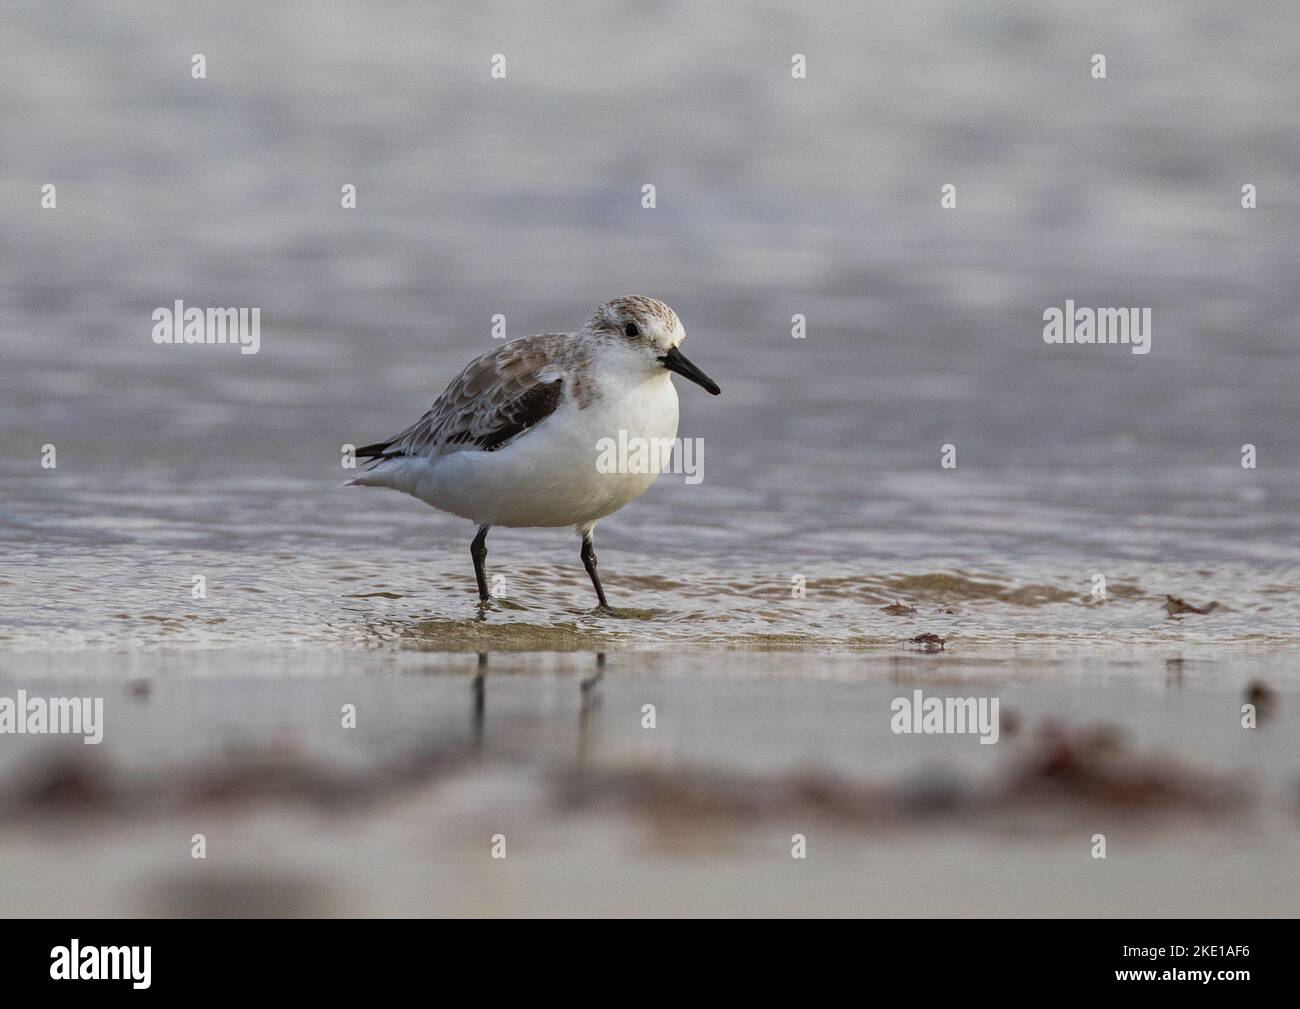 A Sanderling (Calidris alba) standing in the sea water catching food in the intertidal zone. Stock Photo